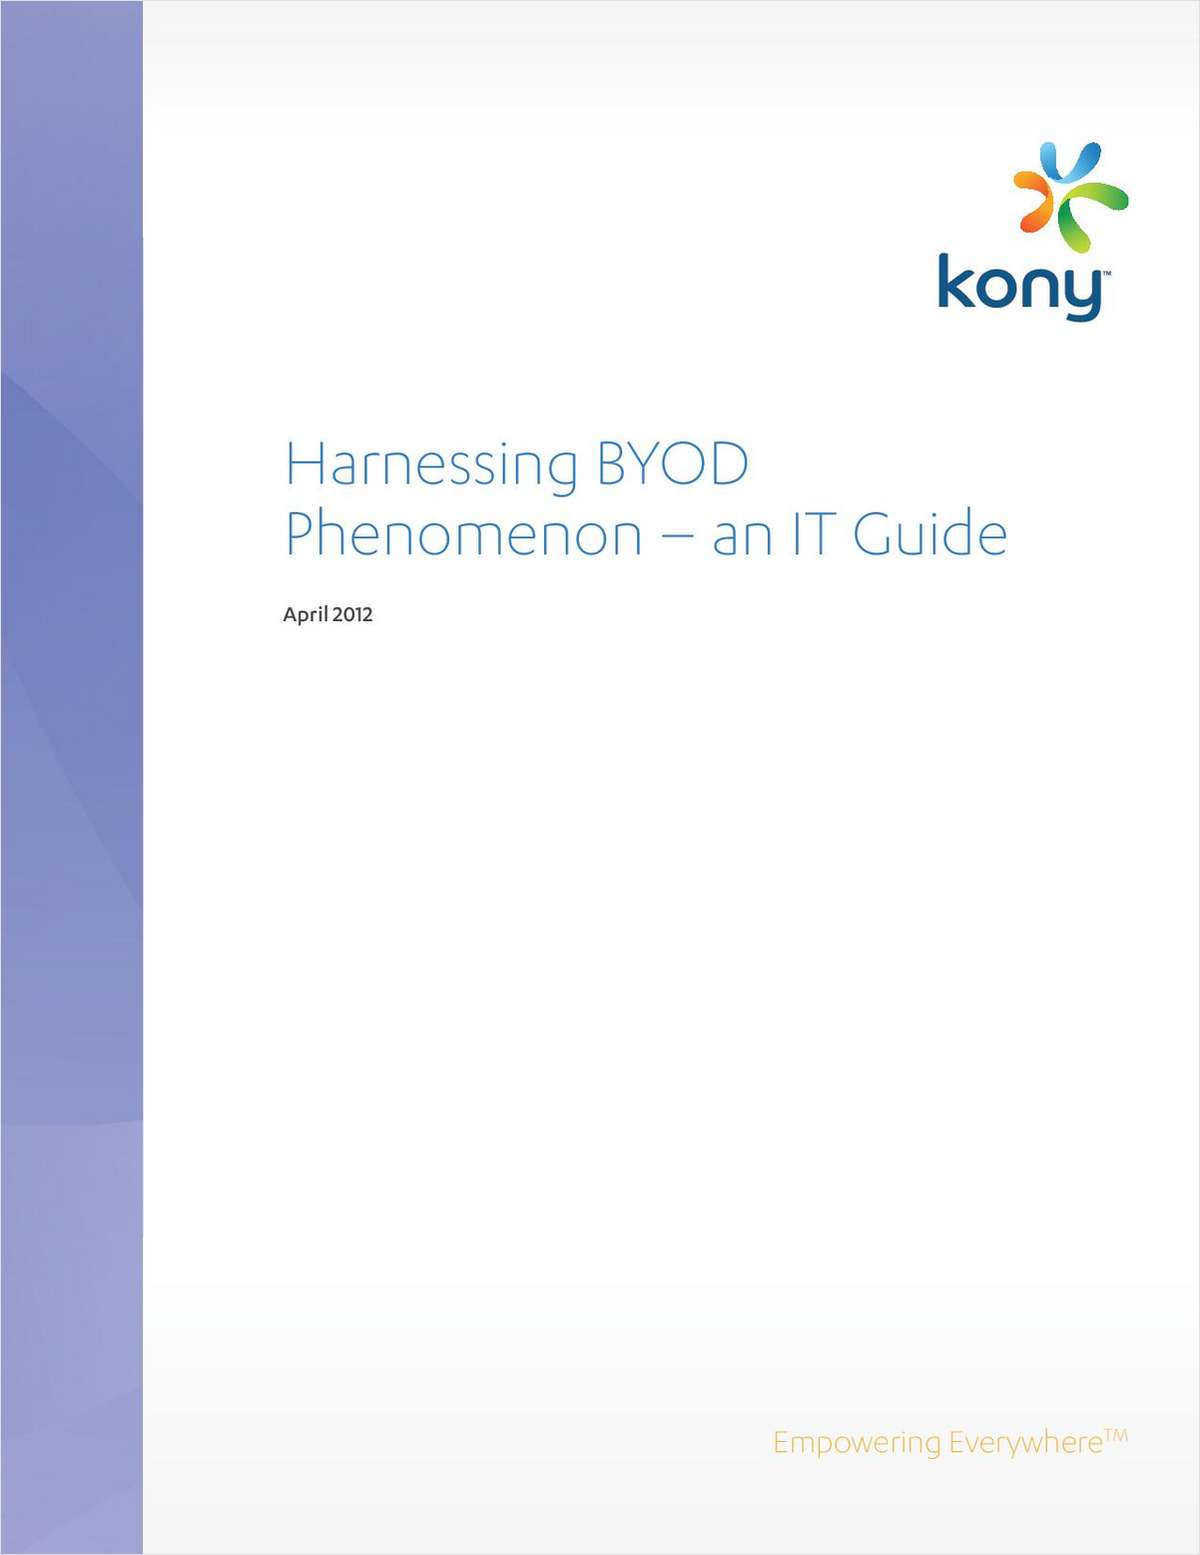 Harnessing the BYOD Phenomenon - an IT Guide